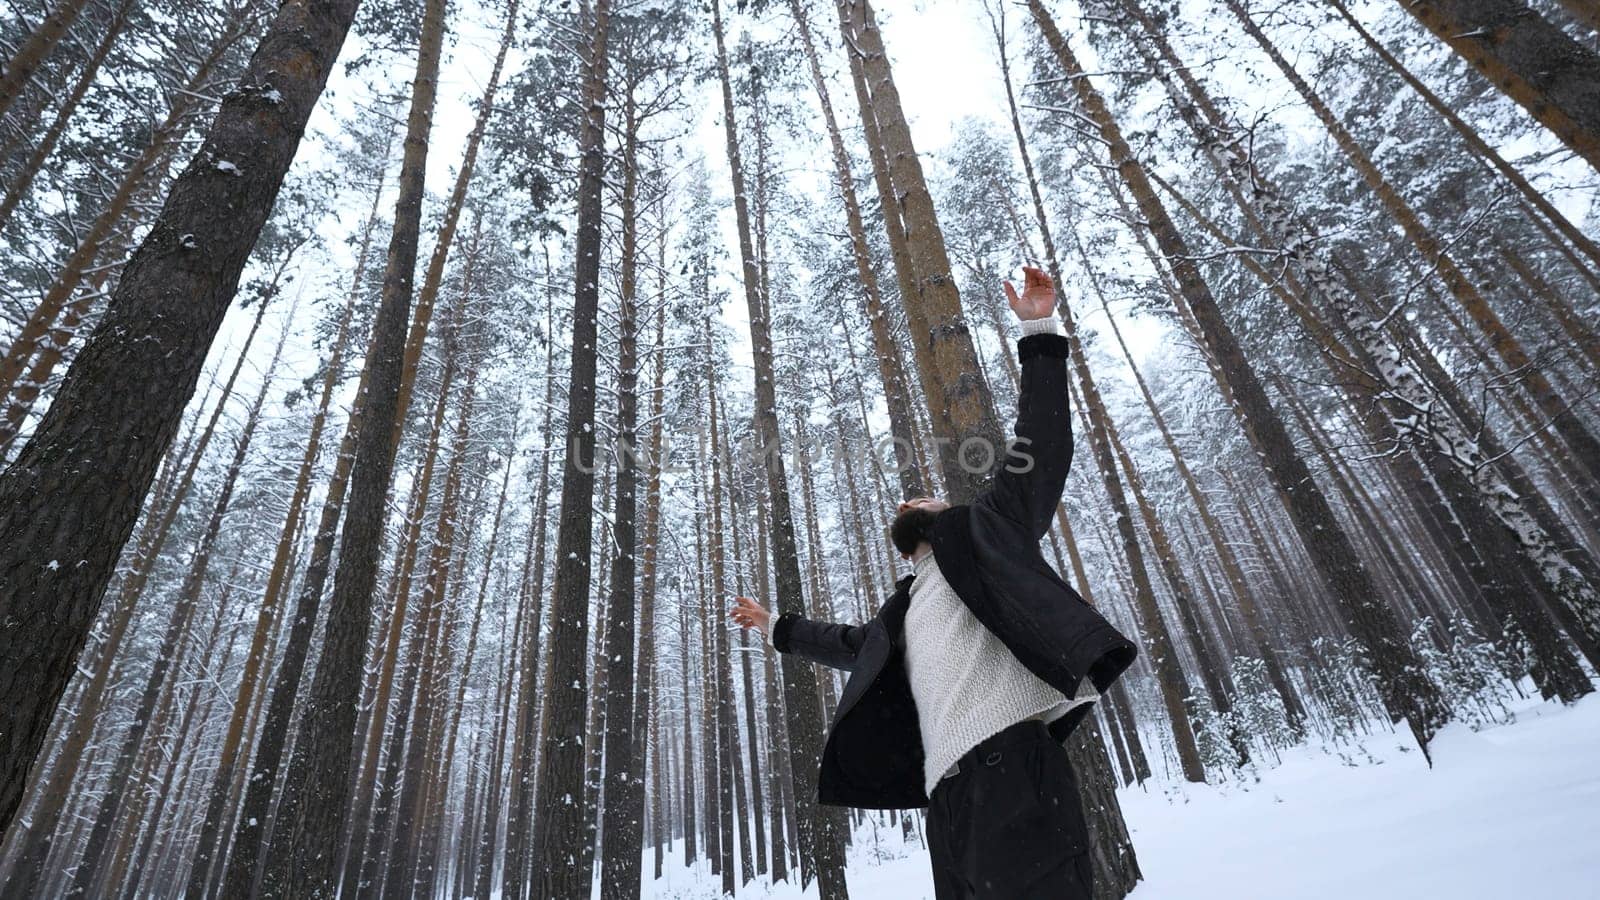 Man dancing in winter forest. Media. Stylish man filming video clip in winter forest. Shooting stylish man in winter forest.